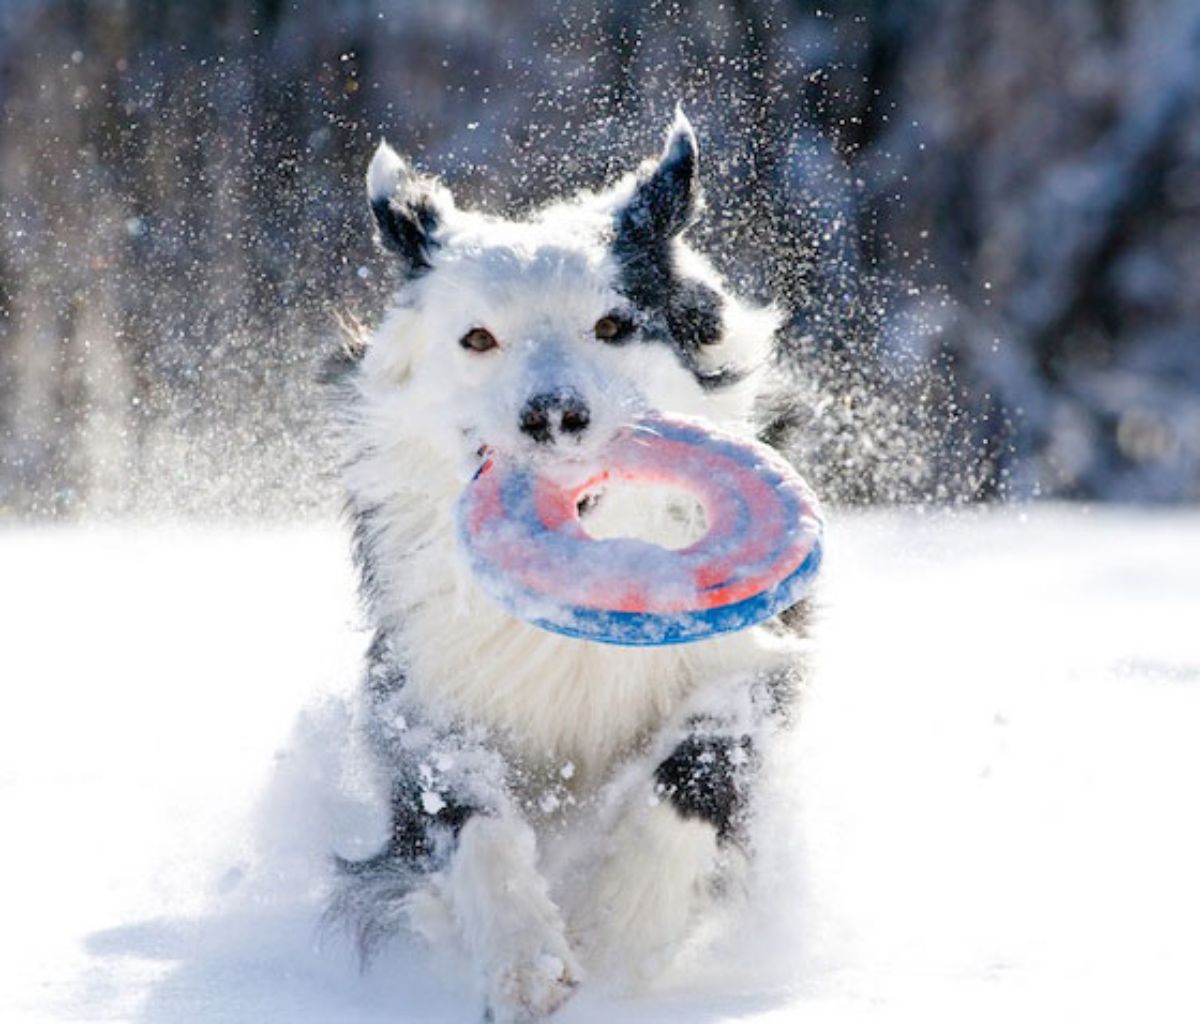 fluffy black and white dog running in snow with a red and blue frisbee in its mouth